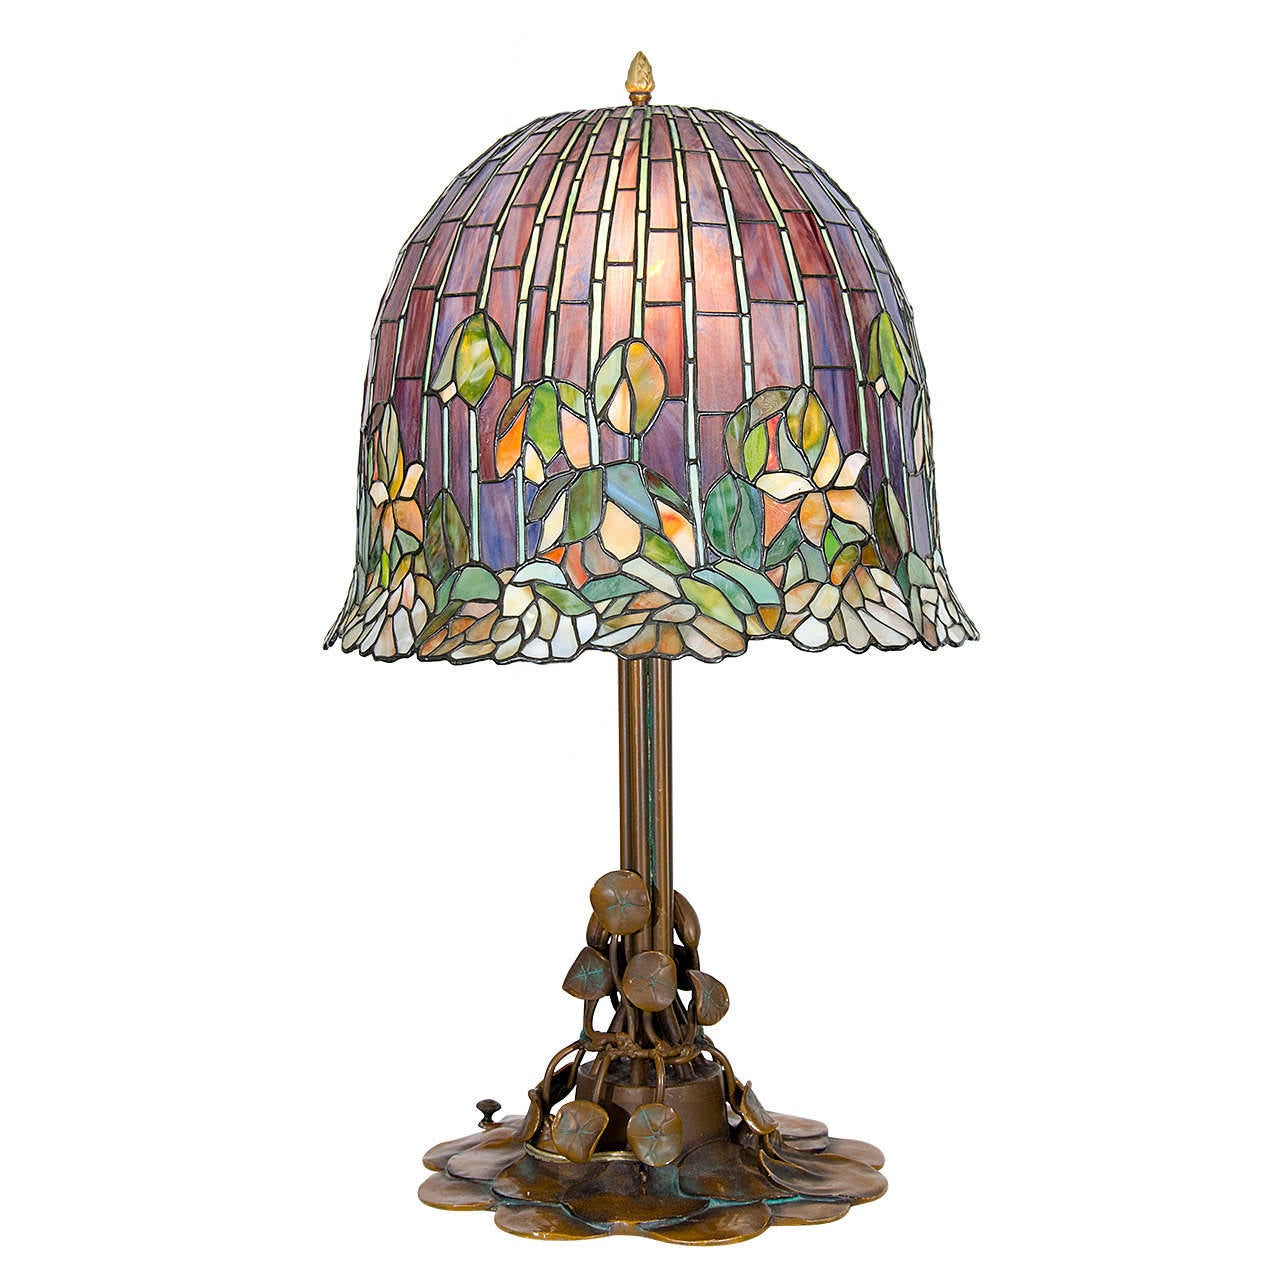 Contemporary Stained Glass Table Lamp Inspired by Tiffany